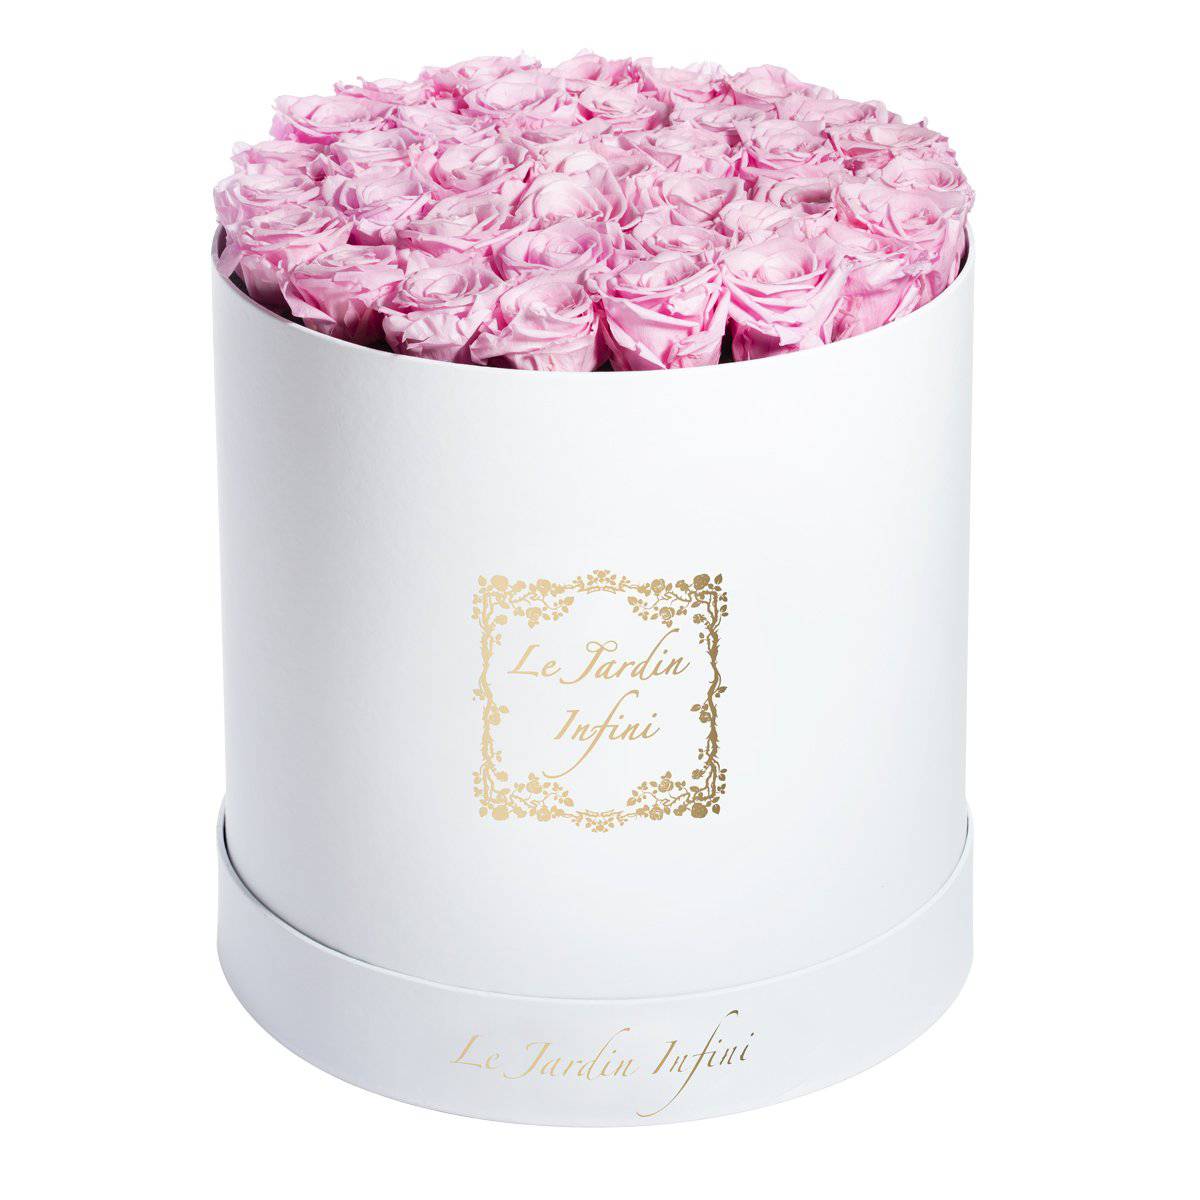 Soft Pink Preserved Roses - Large Round White Box - Le Jardin Infini Roses in a Box